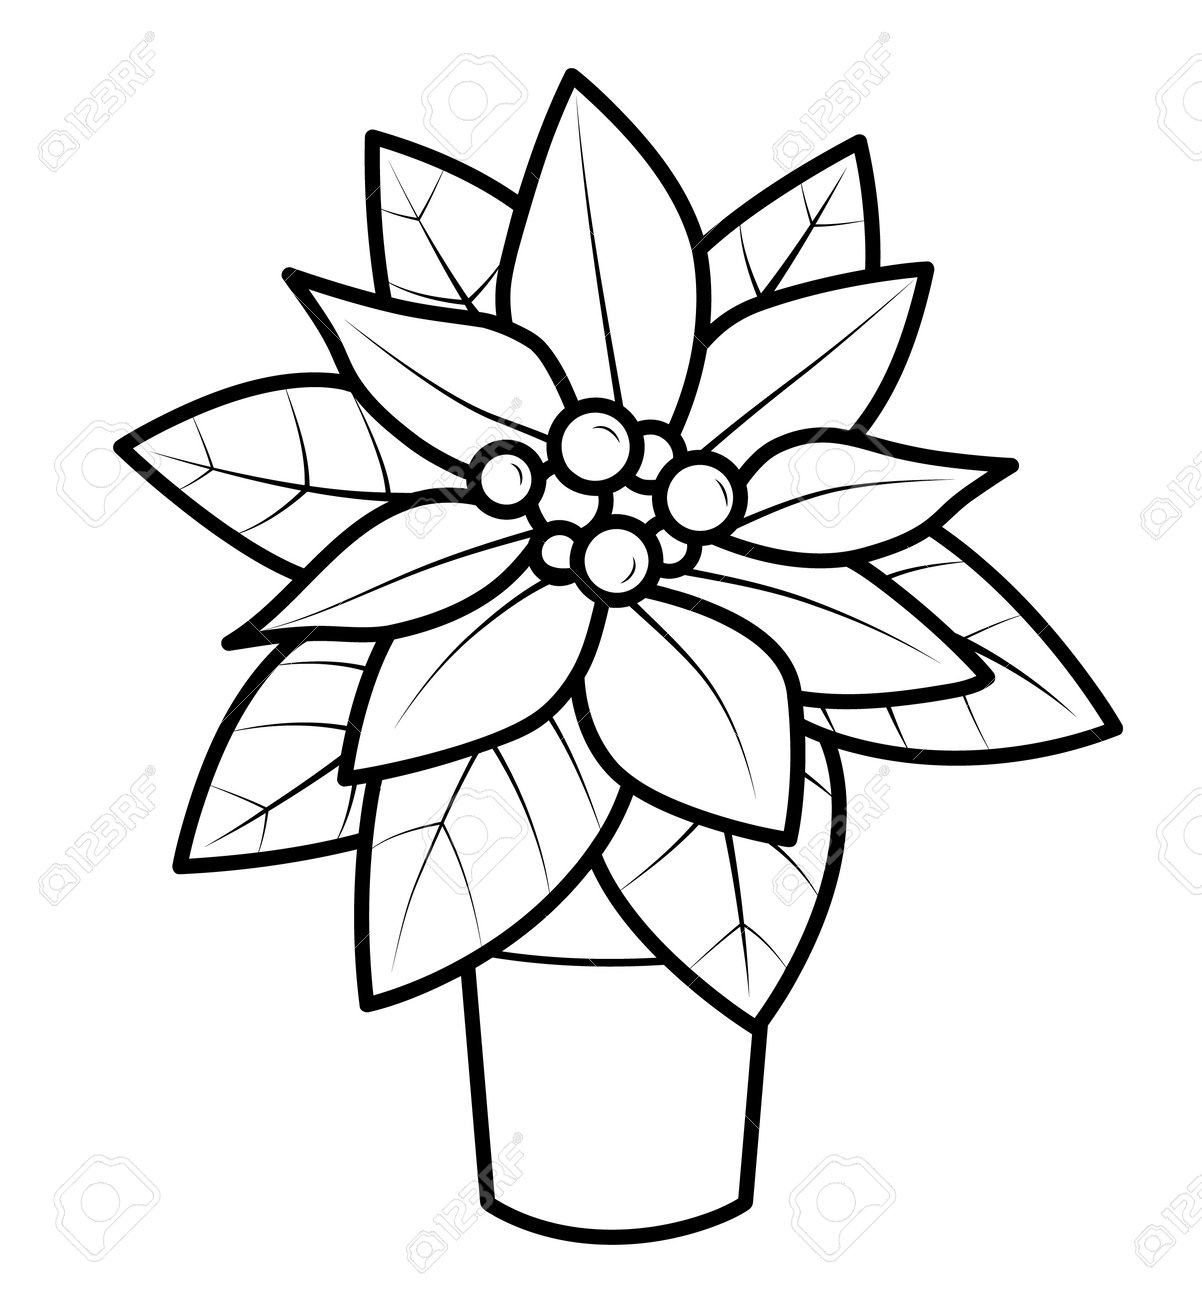 Christmas coloring book or page for kids poinsettia black and white vector illustration royalty free svg cliparts vectors and stock illustration image